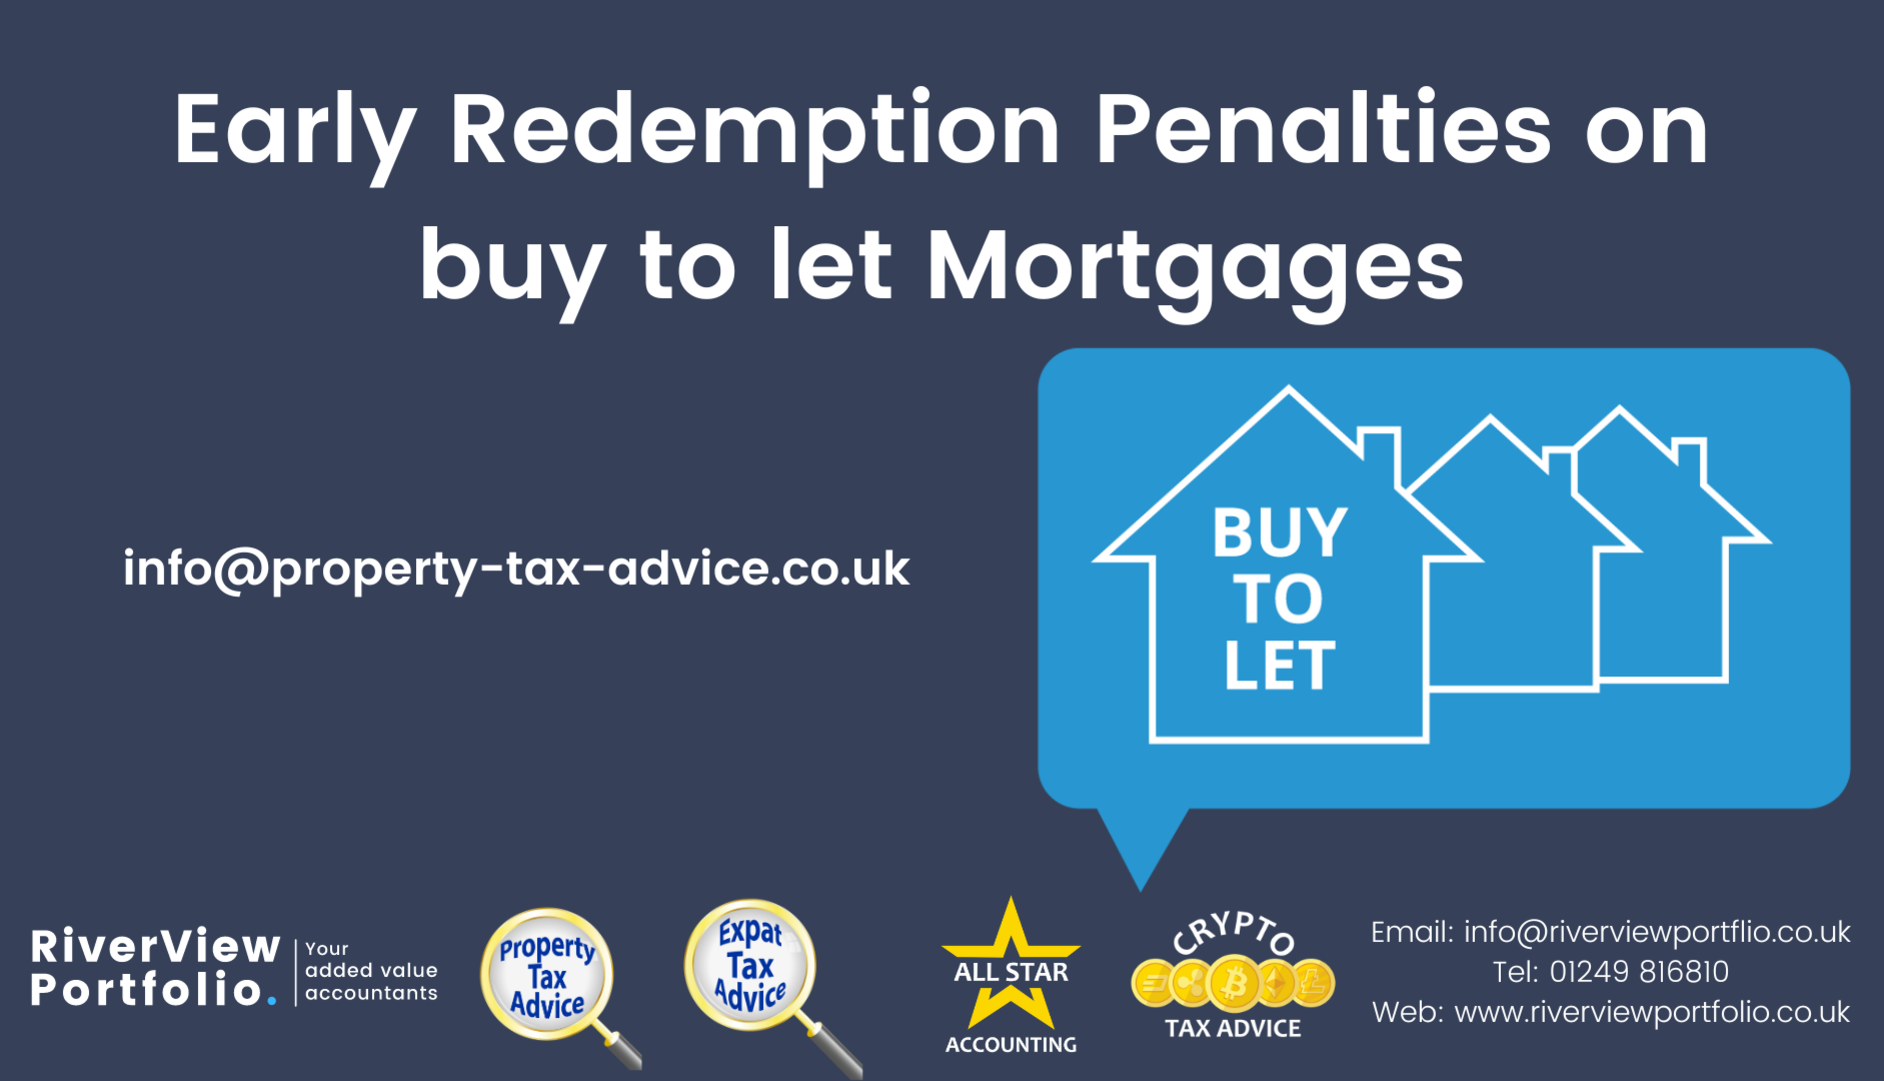 taxable, early redemption penalties, buy to let mortgages